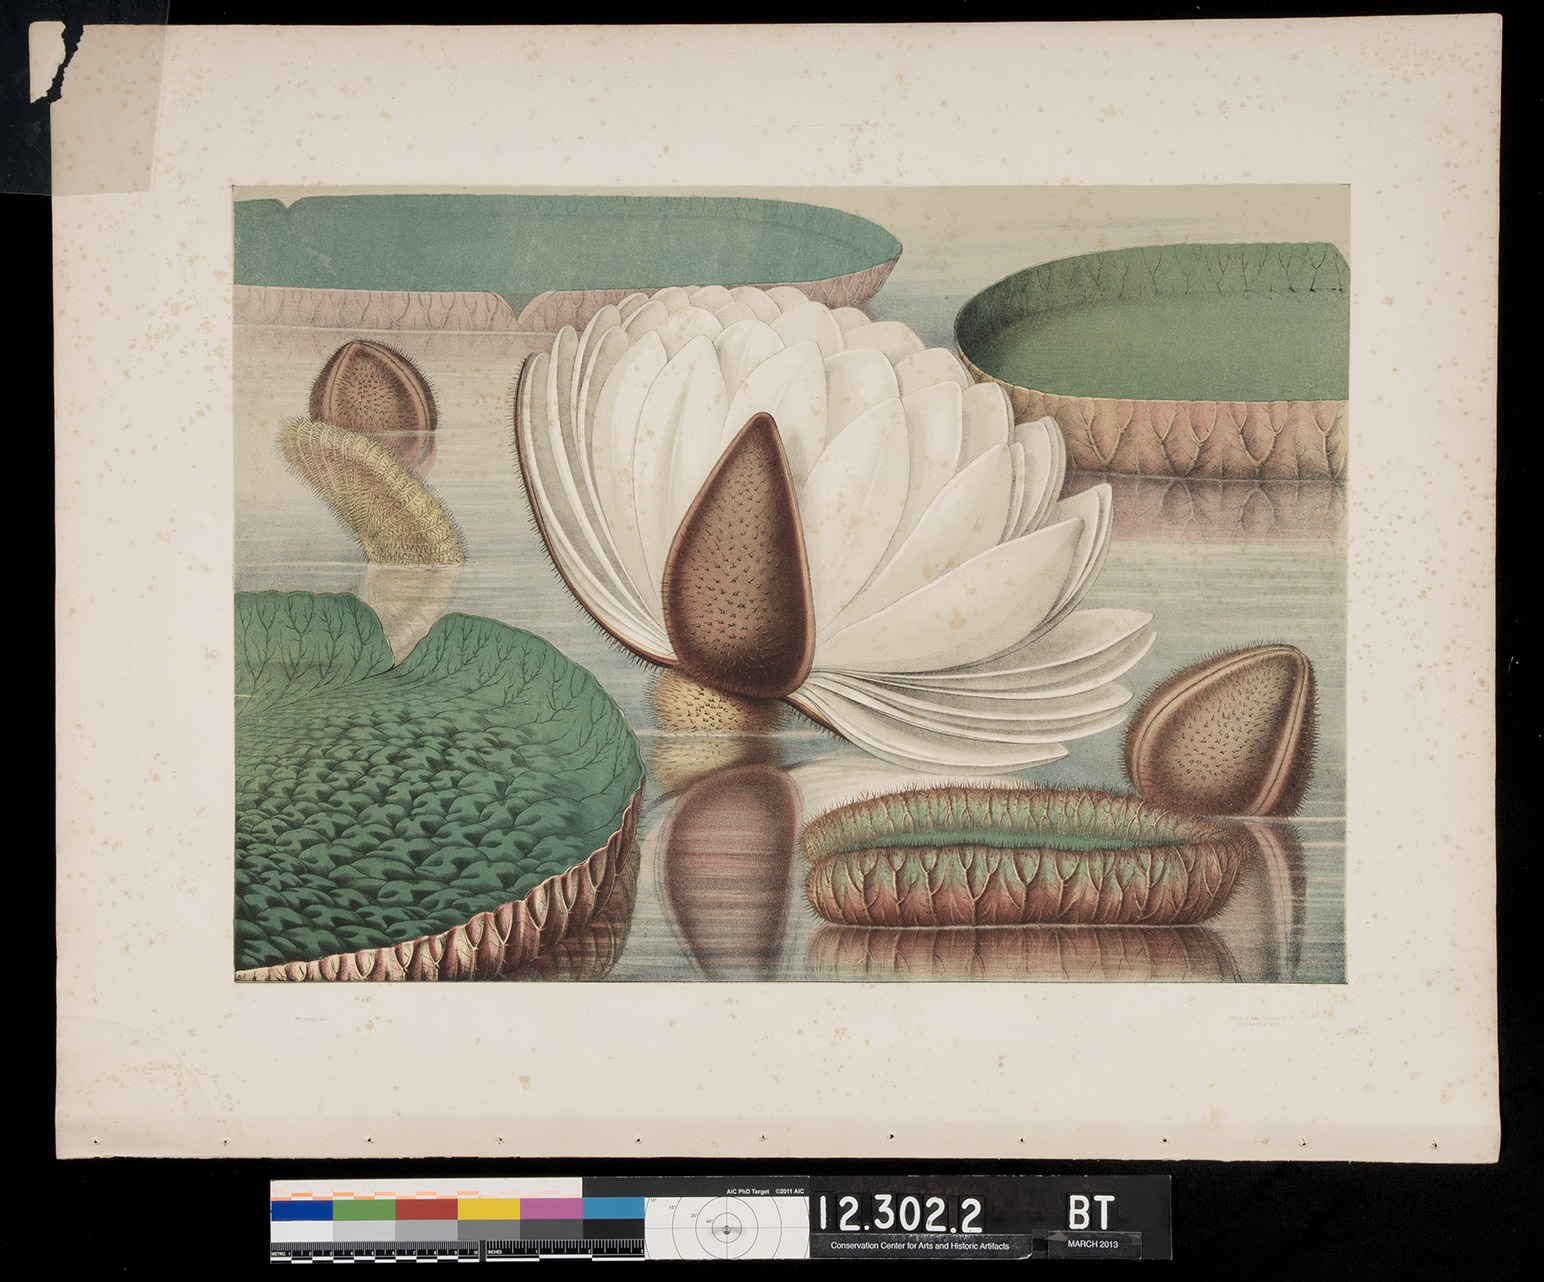 Lithograph by William Sharp from Victoria Regia by John Fisk Allen. The author describes this plate as “leaves of a matured plant, with the expanding flower of the actual size.” Here the plate has been removed from the book and awaits treatment at CCAHA. Note the brown spotting, or foxing, the tear in the upper corner, and the visible binding holes at the bottom of the print.